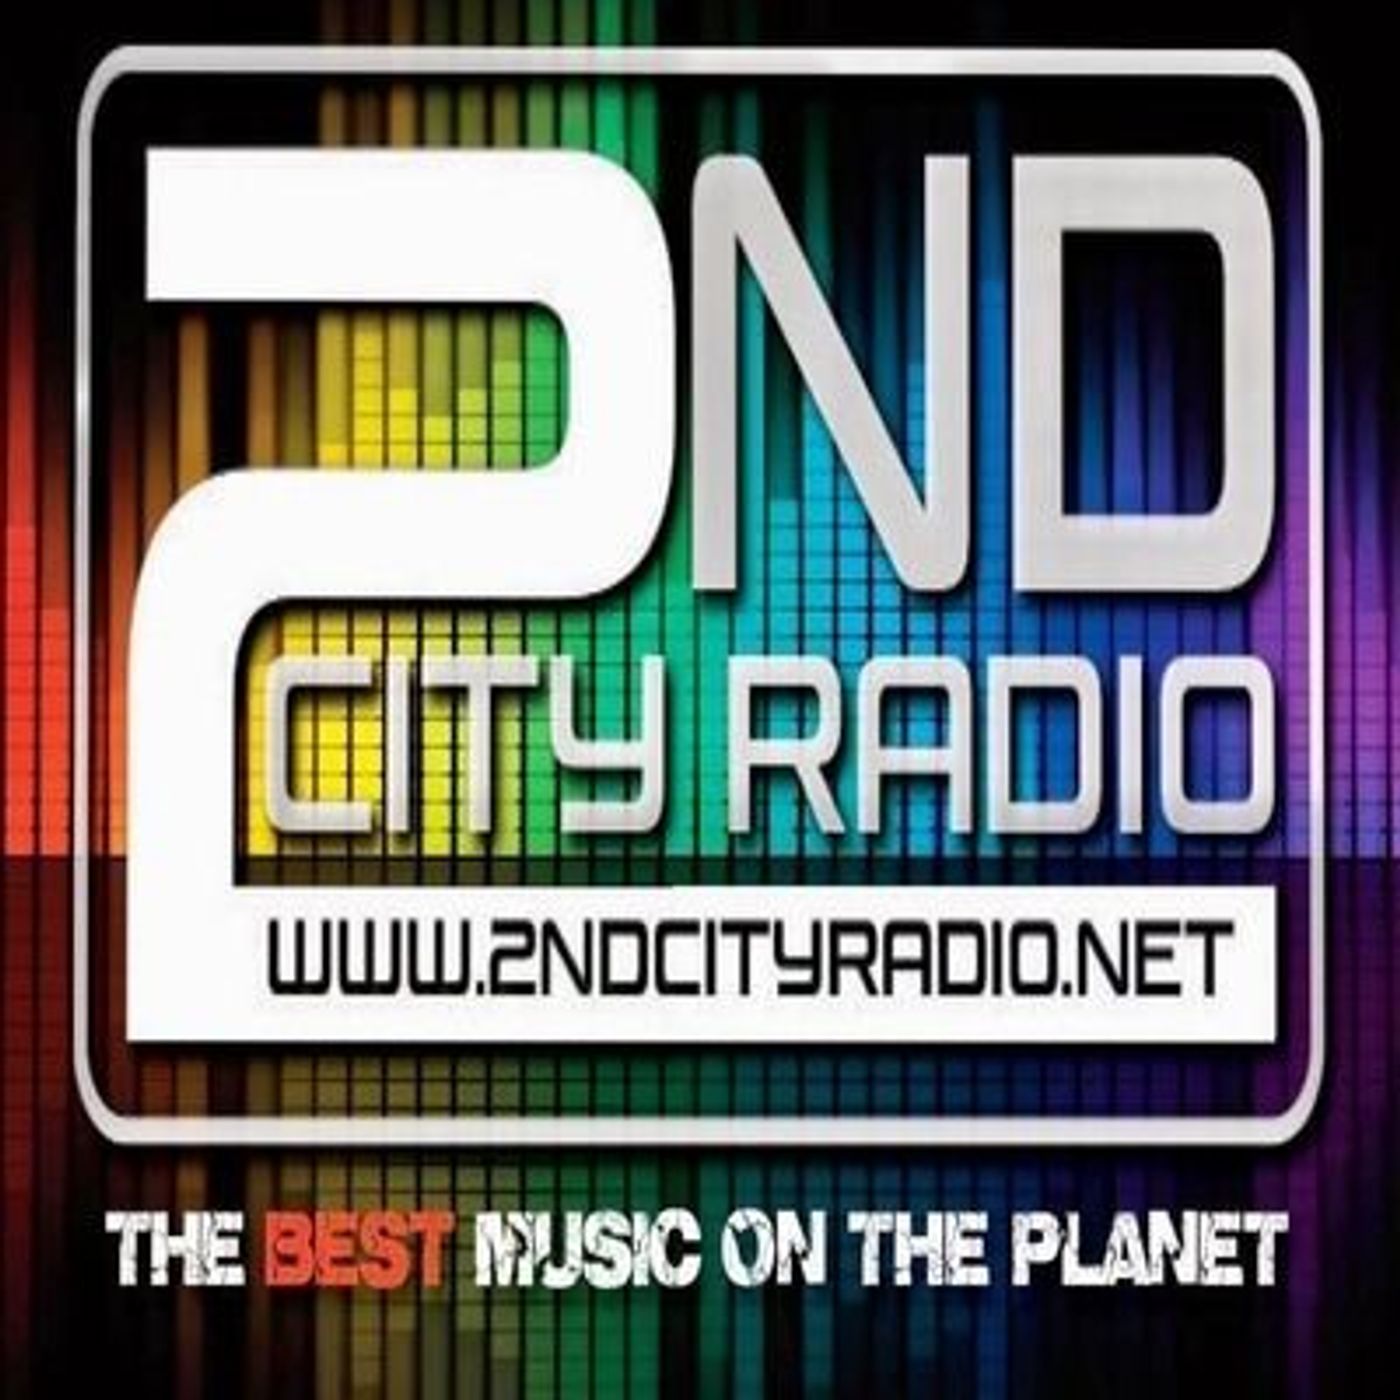 Saturday the 14th of May 2022 on 2ndcity Radio with Classic Chat